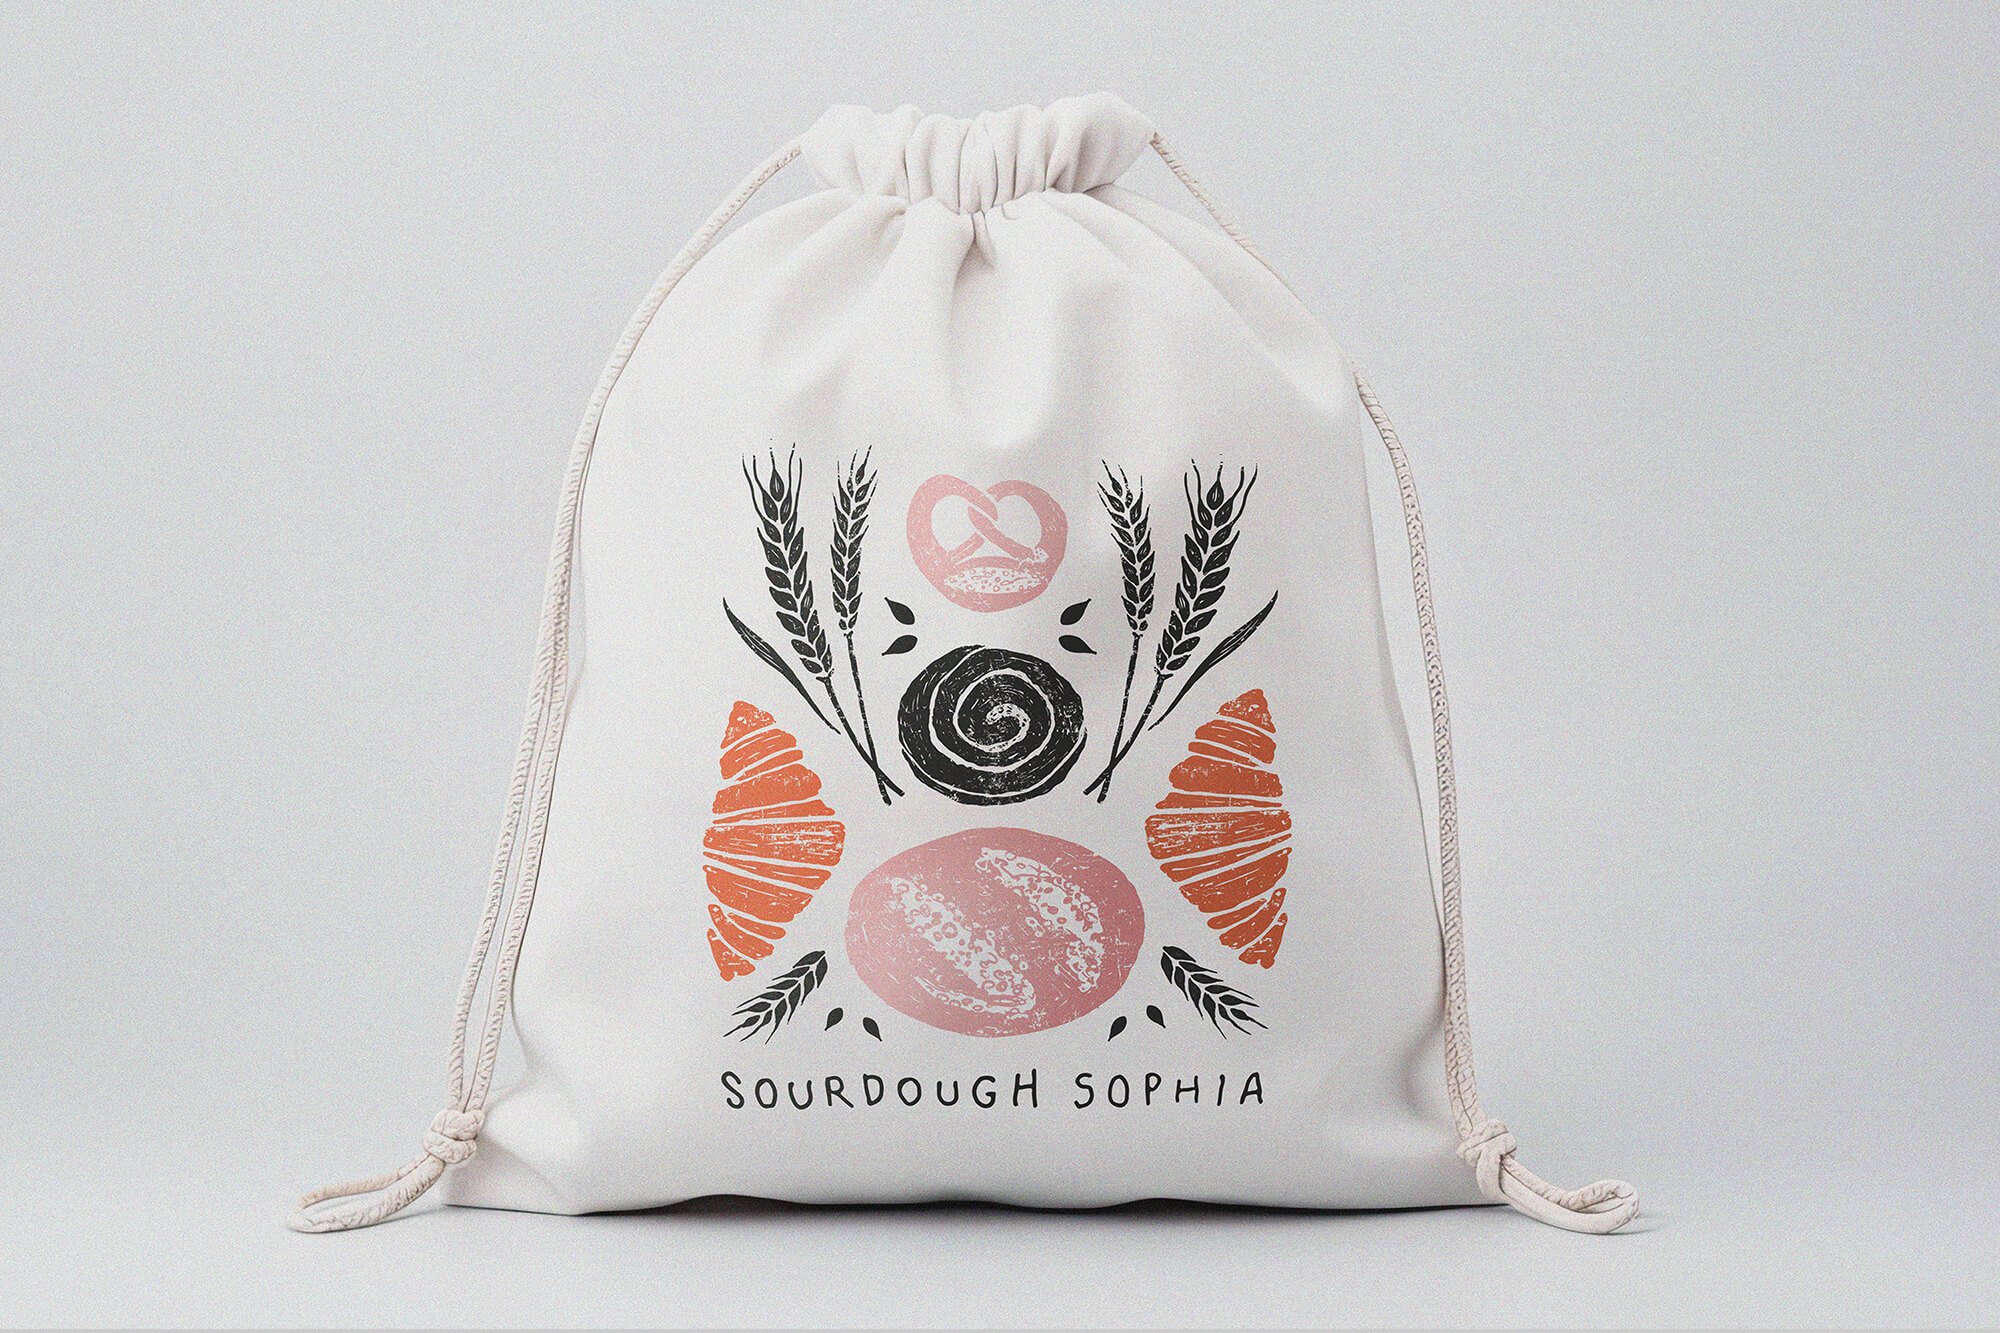  illustrations or a bread bag design in a traditional hand printed feel. 